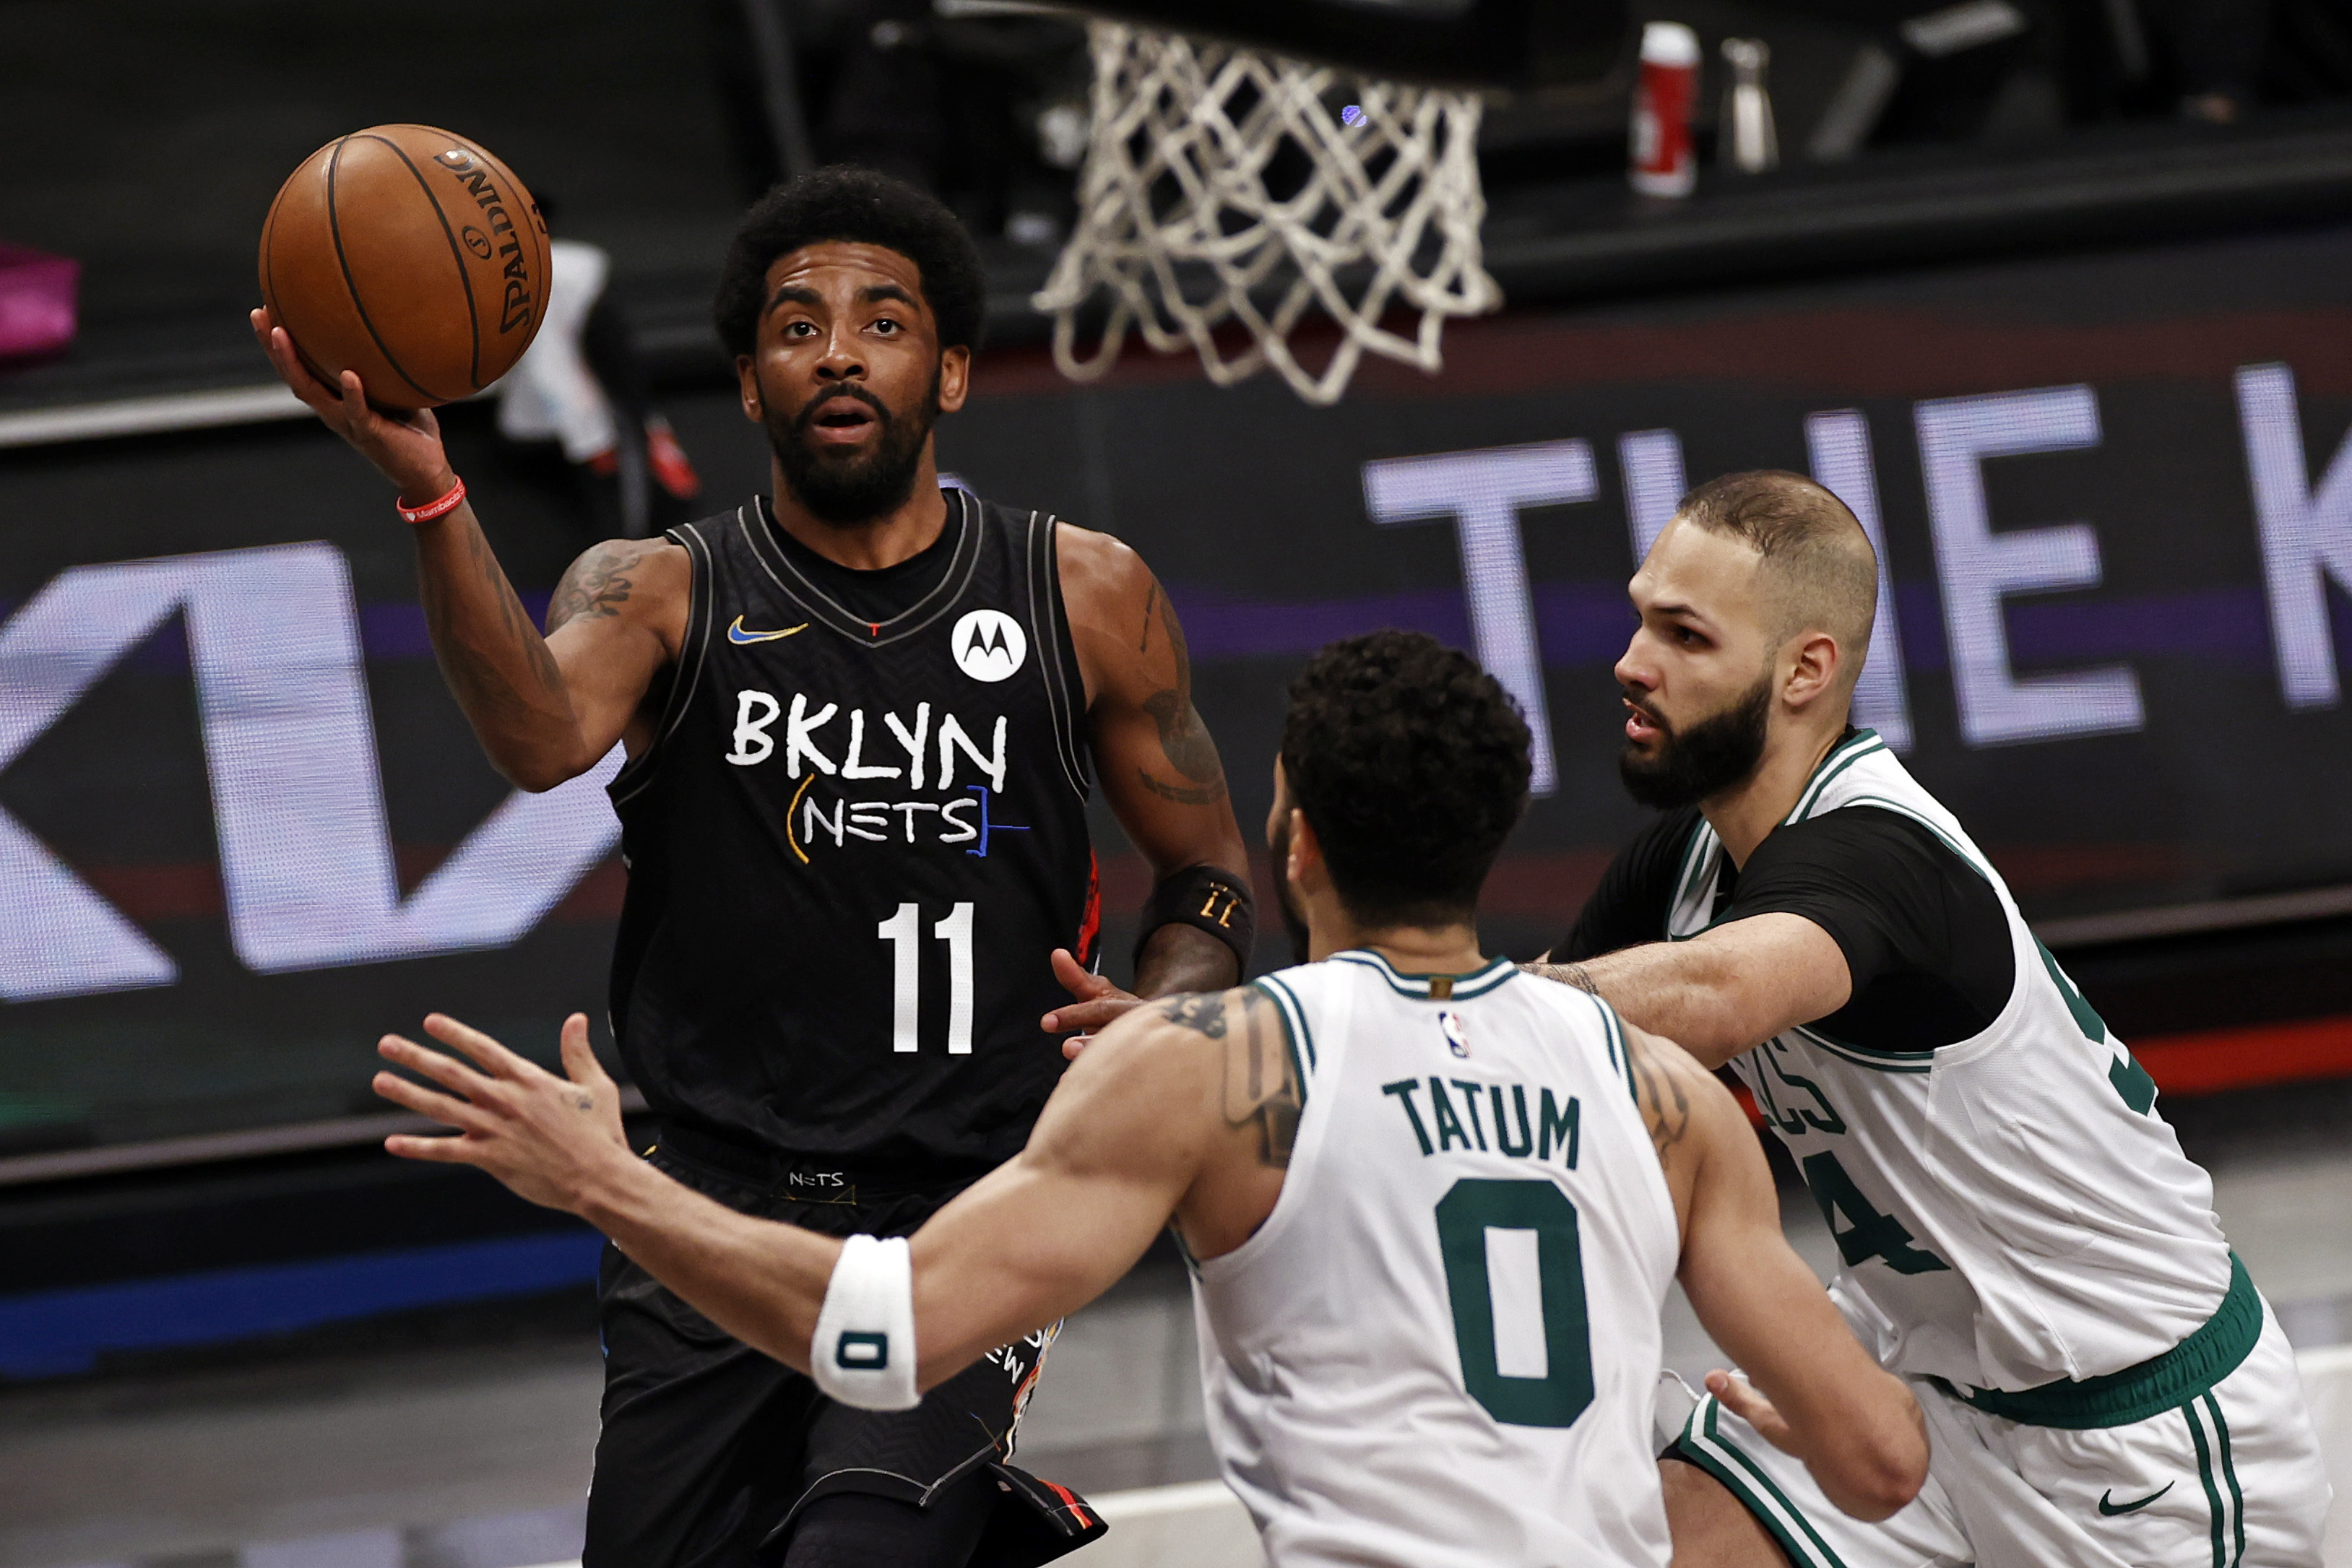 No more distractions': Kyrie Irving's strong message after Nets' 8th win in  9 games